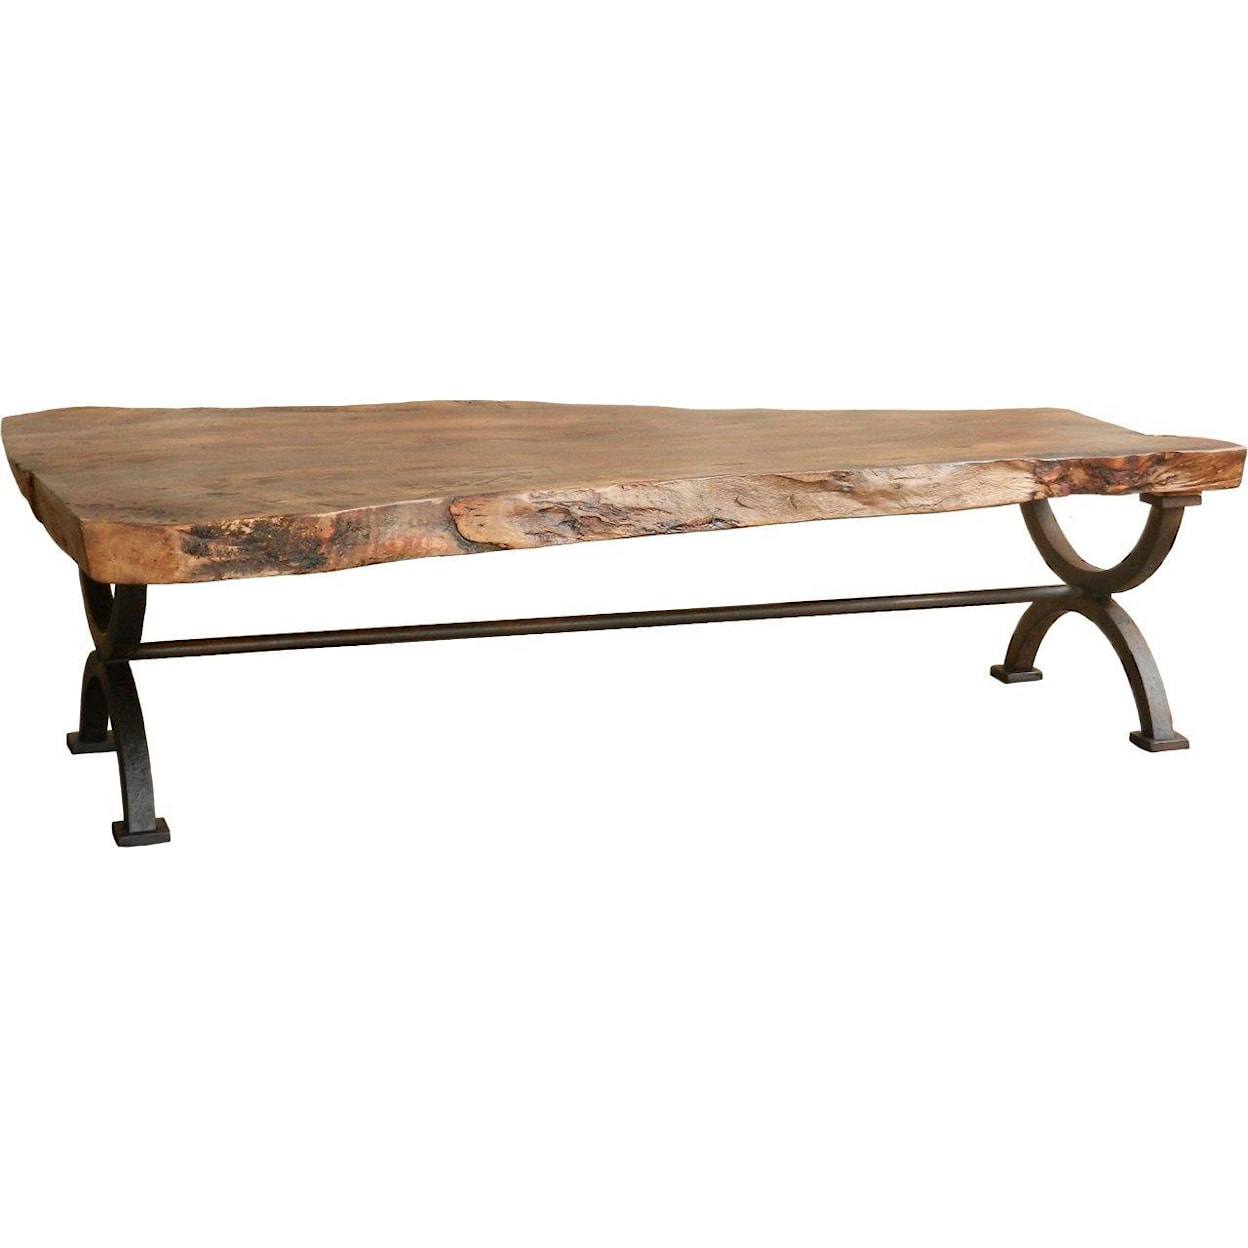 Furniture Source International Occasional Tables Wyatt Coffee Table